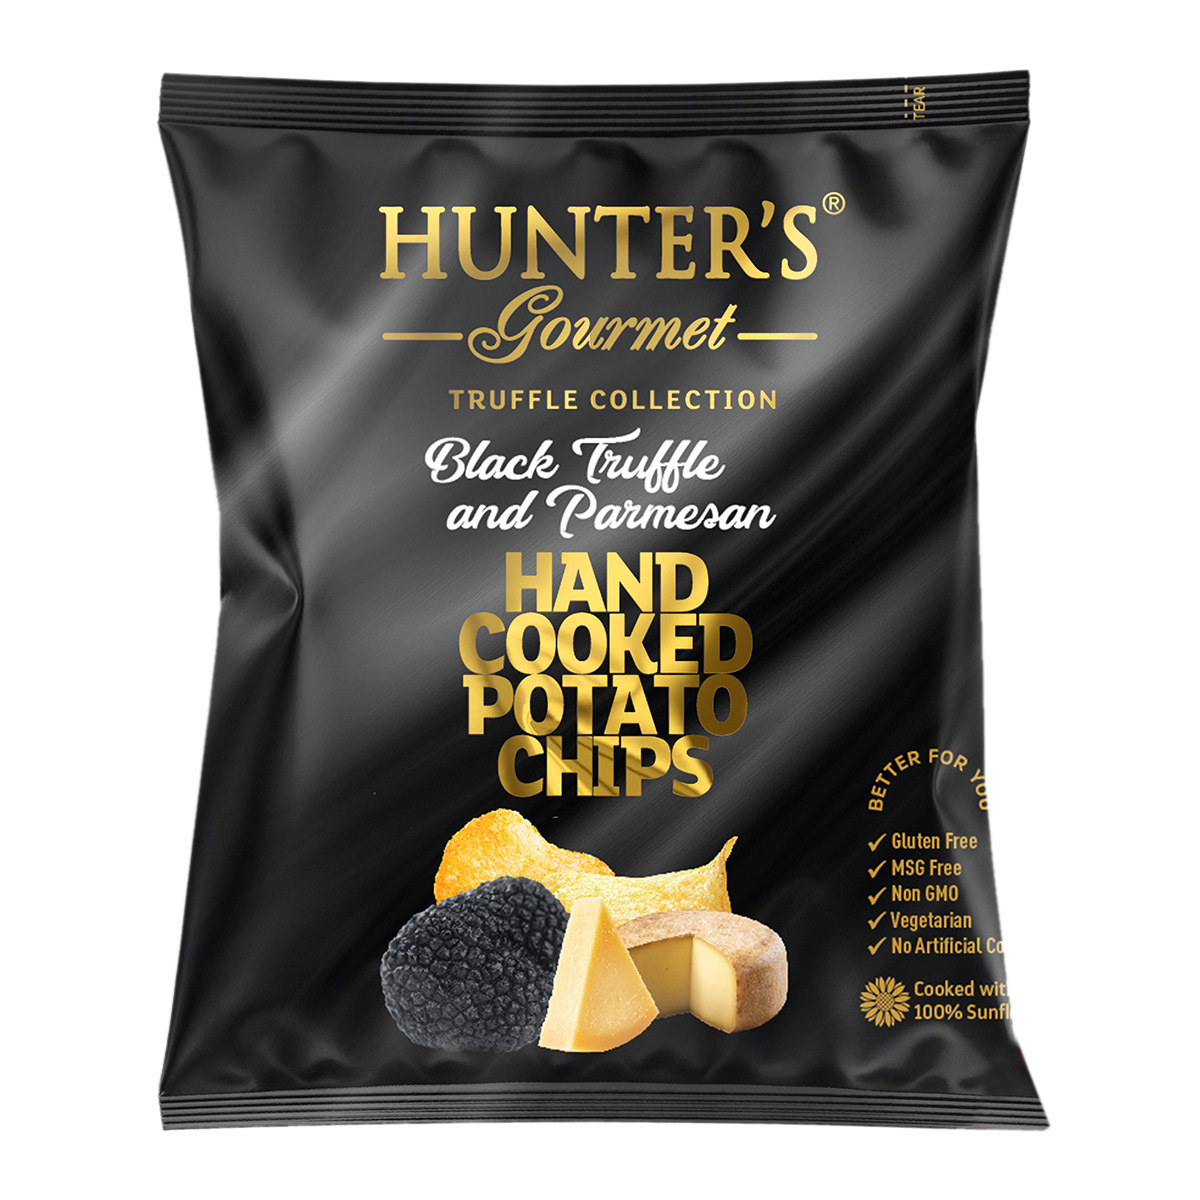 Hunter’s Gourmet Hand Cooked Potato Chips – Black Truffle – Truffle Collection (125gm)